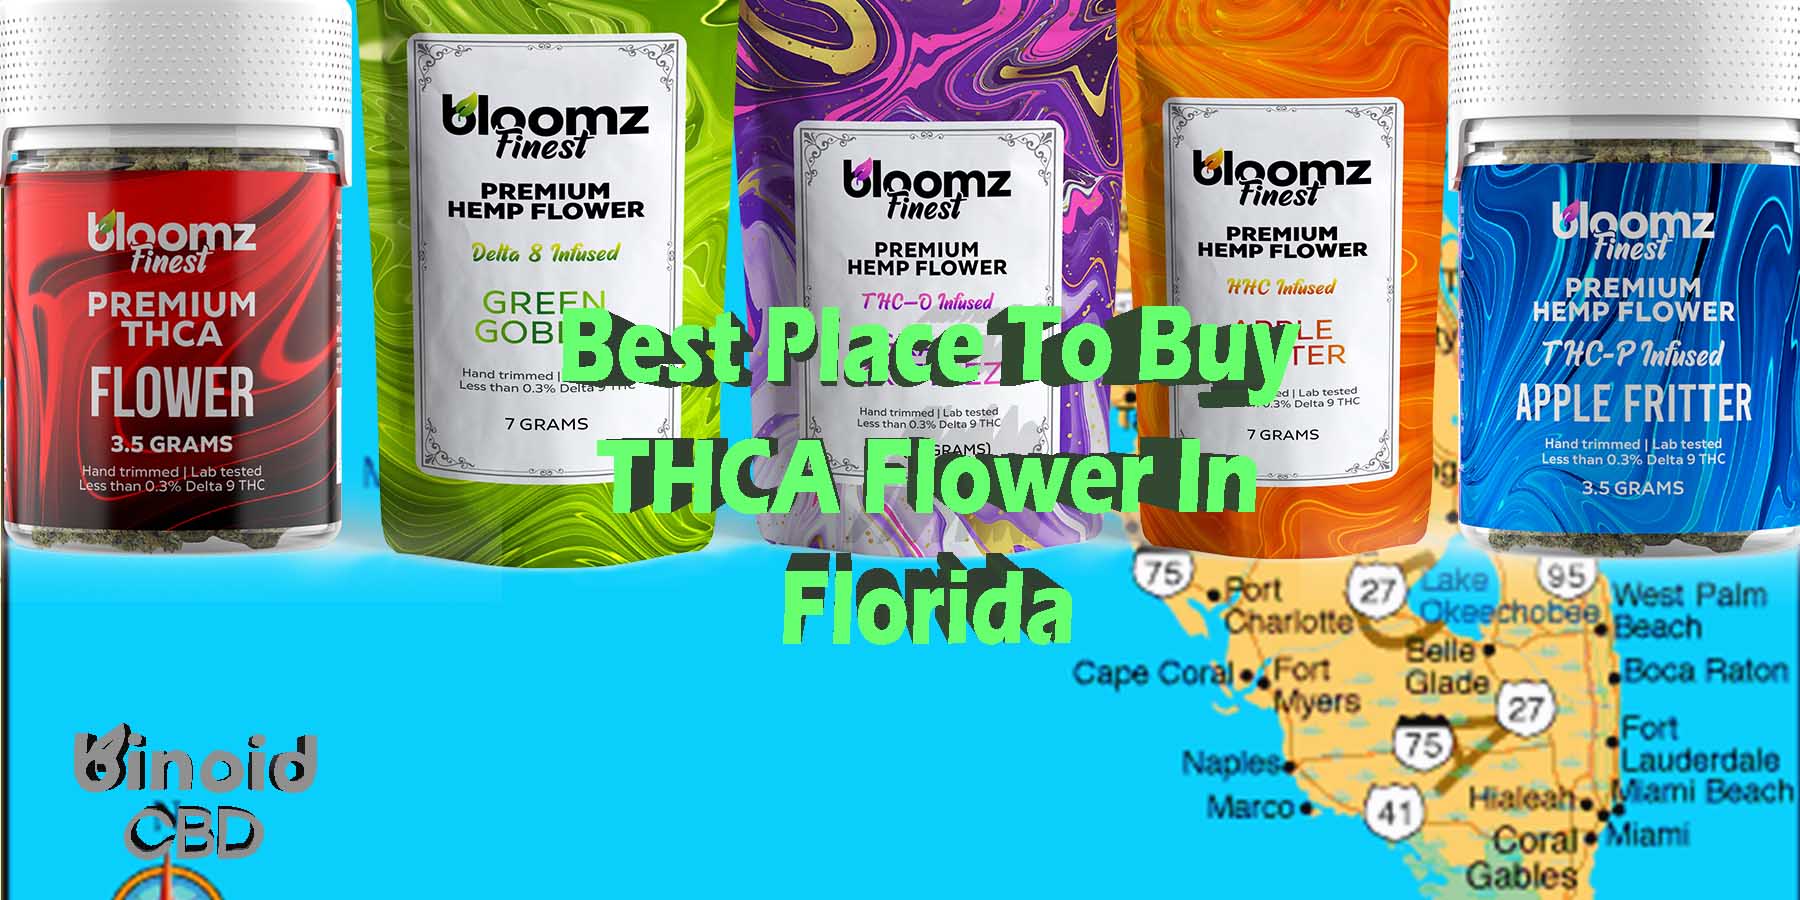 Best Place To Buy THCA Flower In Flordia Pre Rolls Where To Get Near Me Best Place Lowest Price Coupon Discount Strongest Brand Bloomz